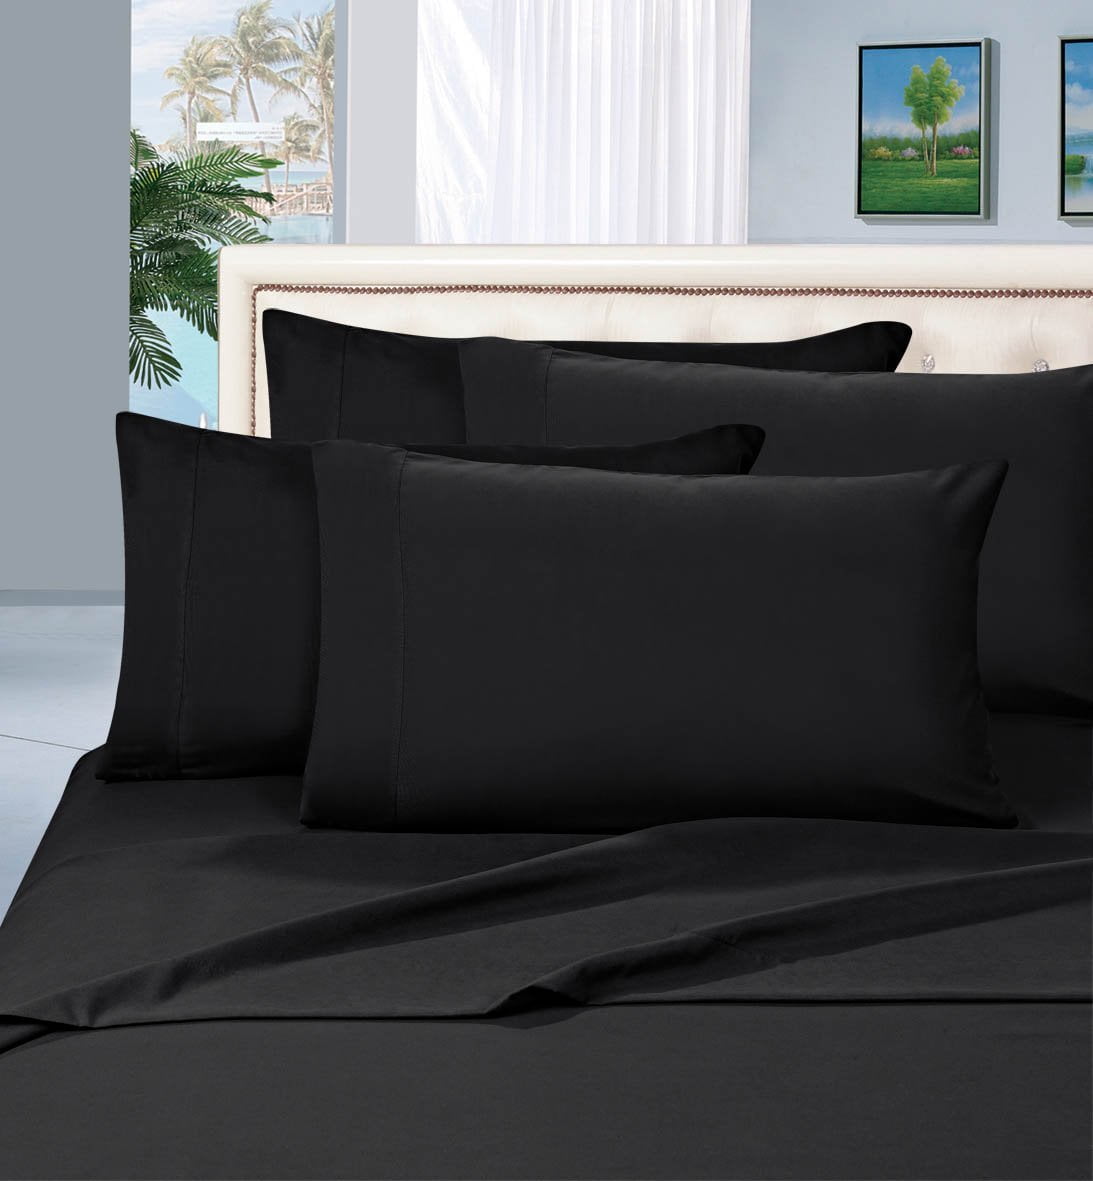 show original title Details about   Us double 1000 tc soft egyptian cotton 5 pc comforter set fitted sheet all 